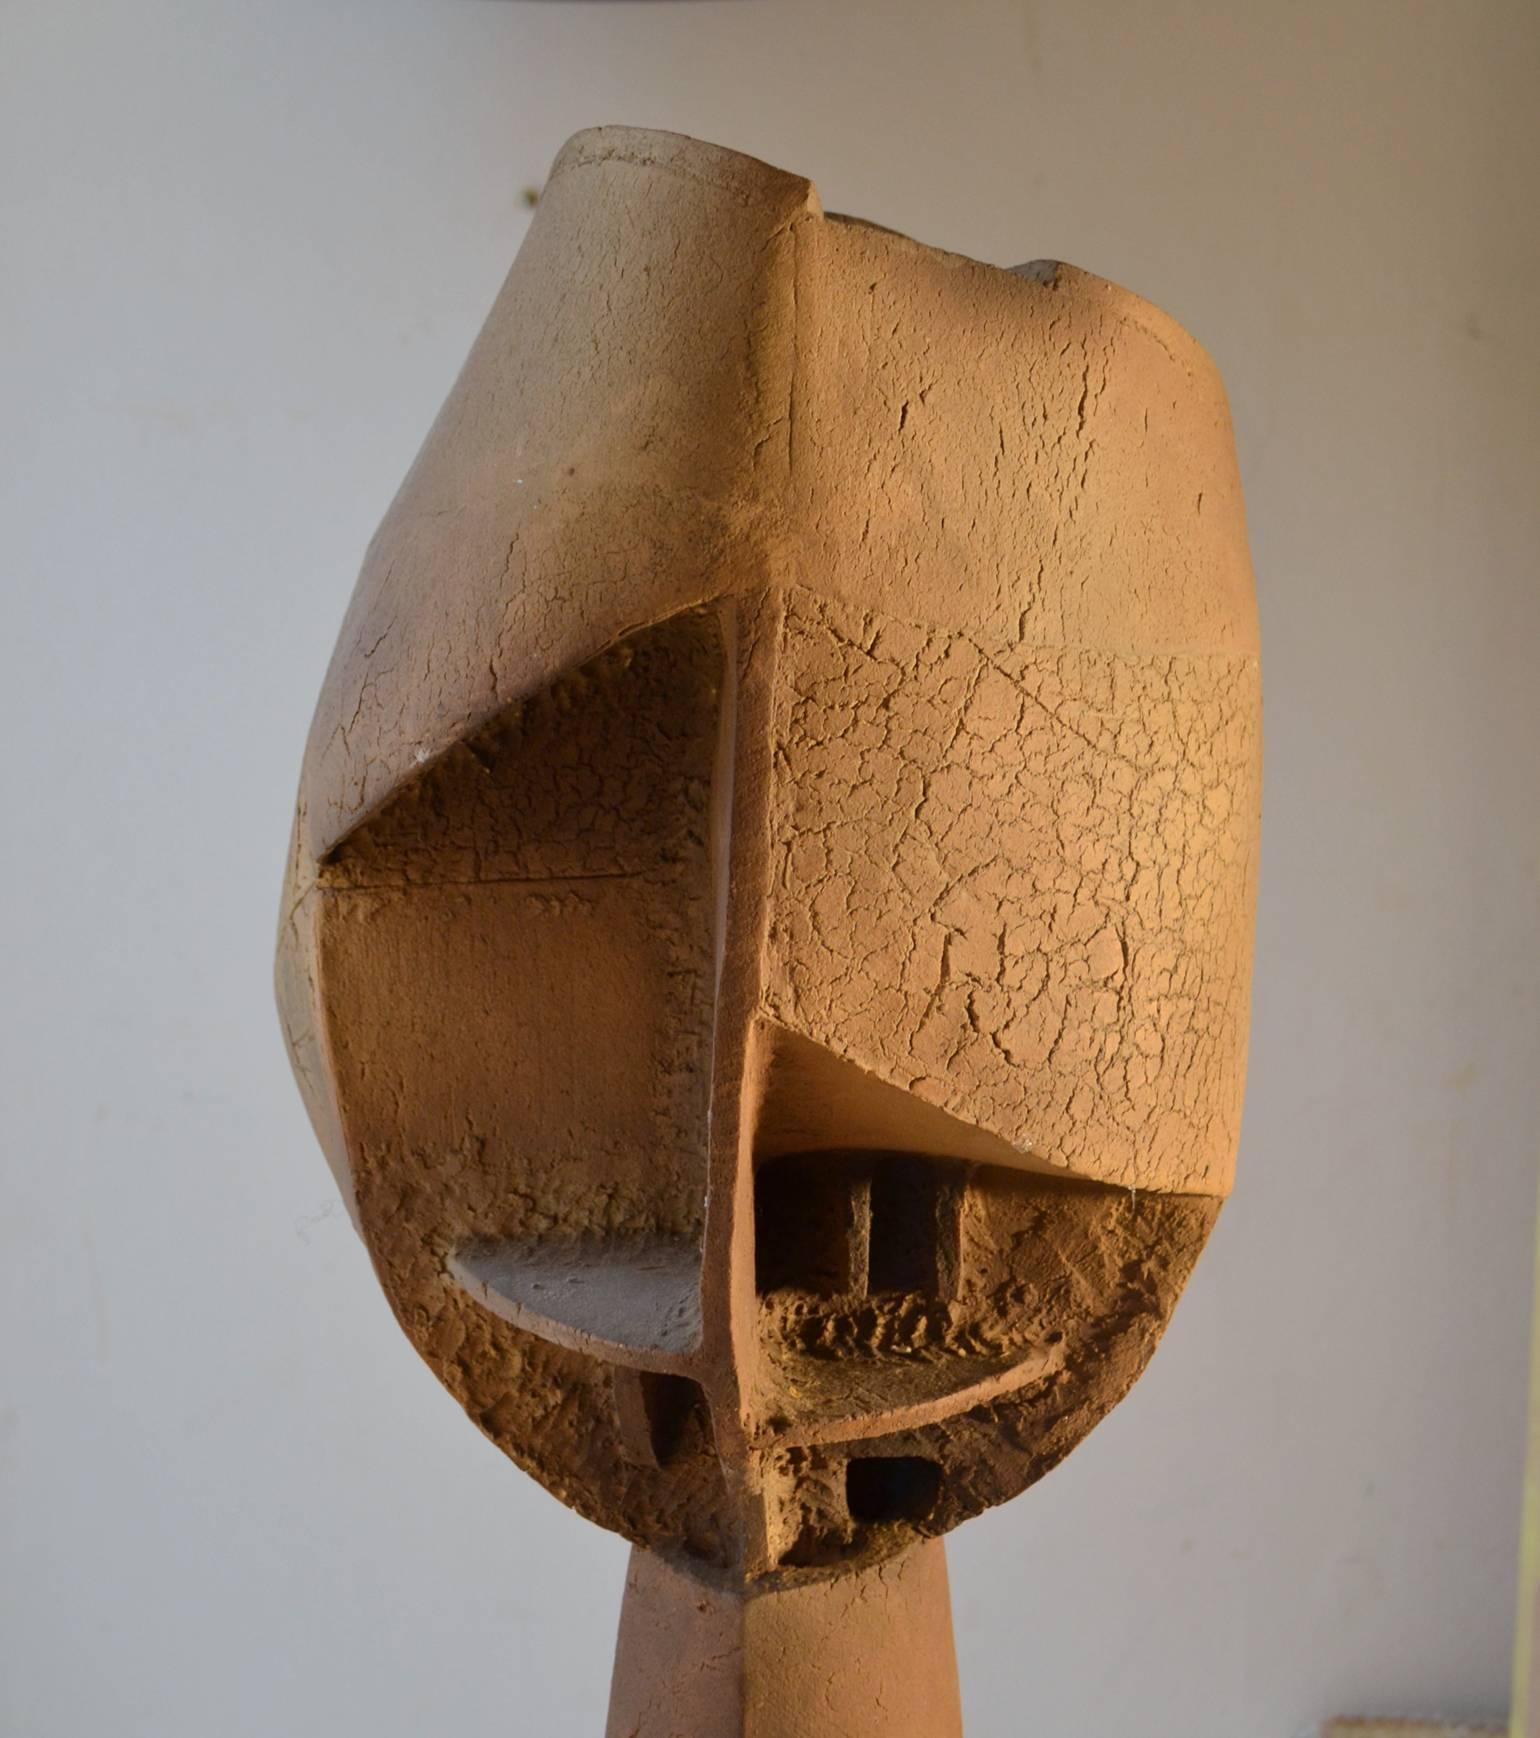 This very tall abstract deconstructed bust sculpture in Cubist style is also brutalist in its execution. It has many faces, from every angle it looks different. The terra cotta sculpture is constructed in slabs of clay by a Scottish artist in the